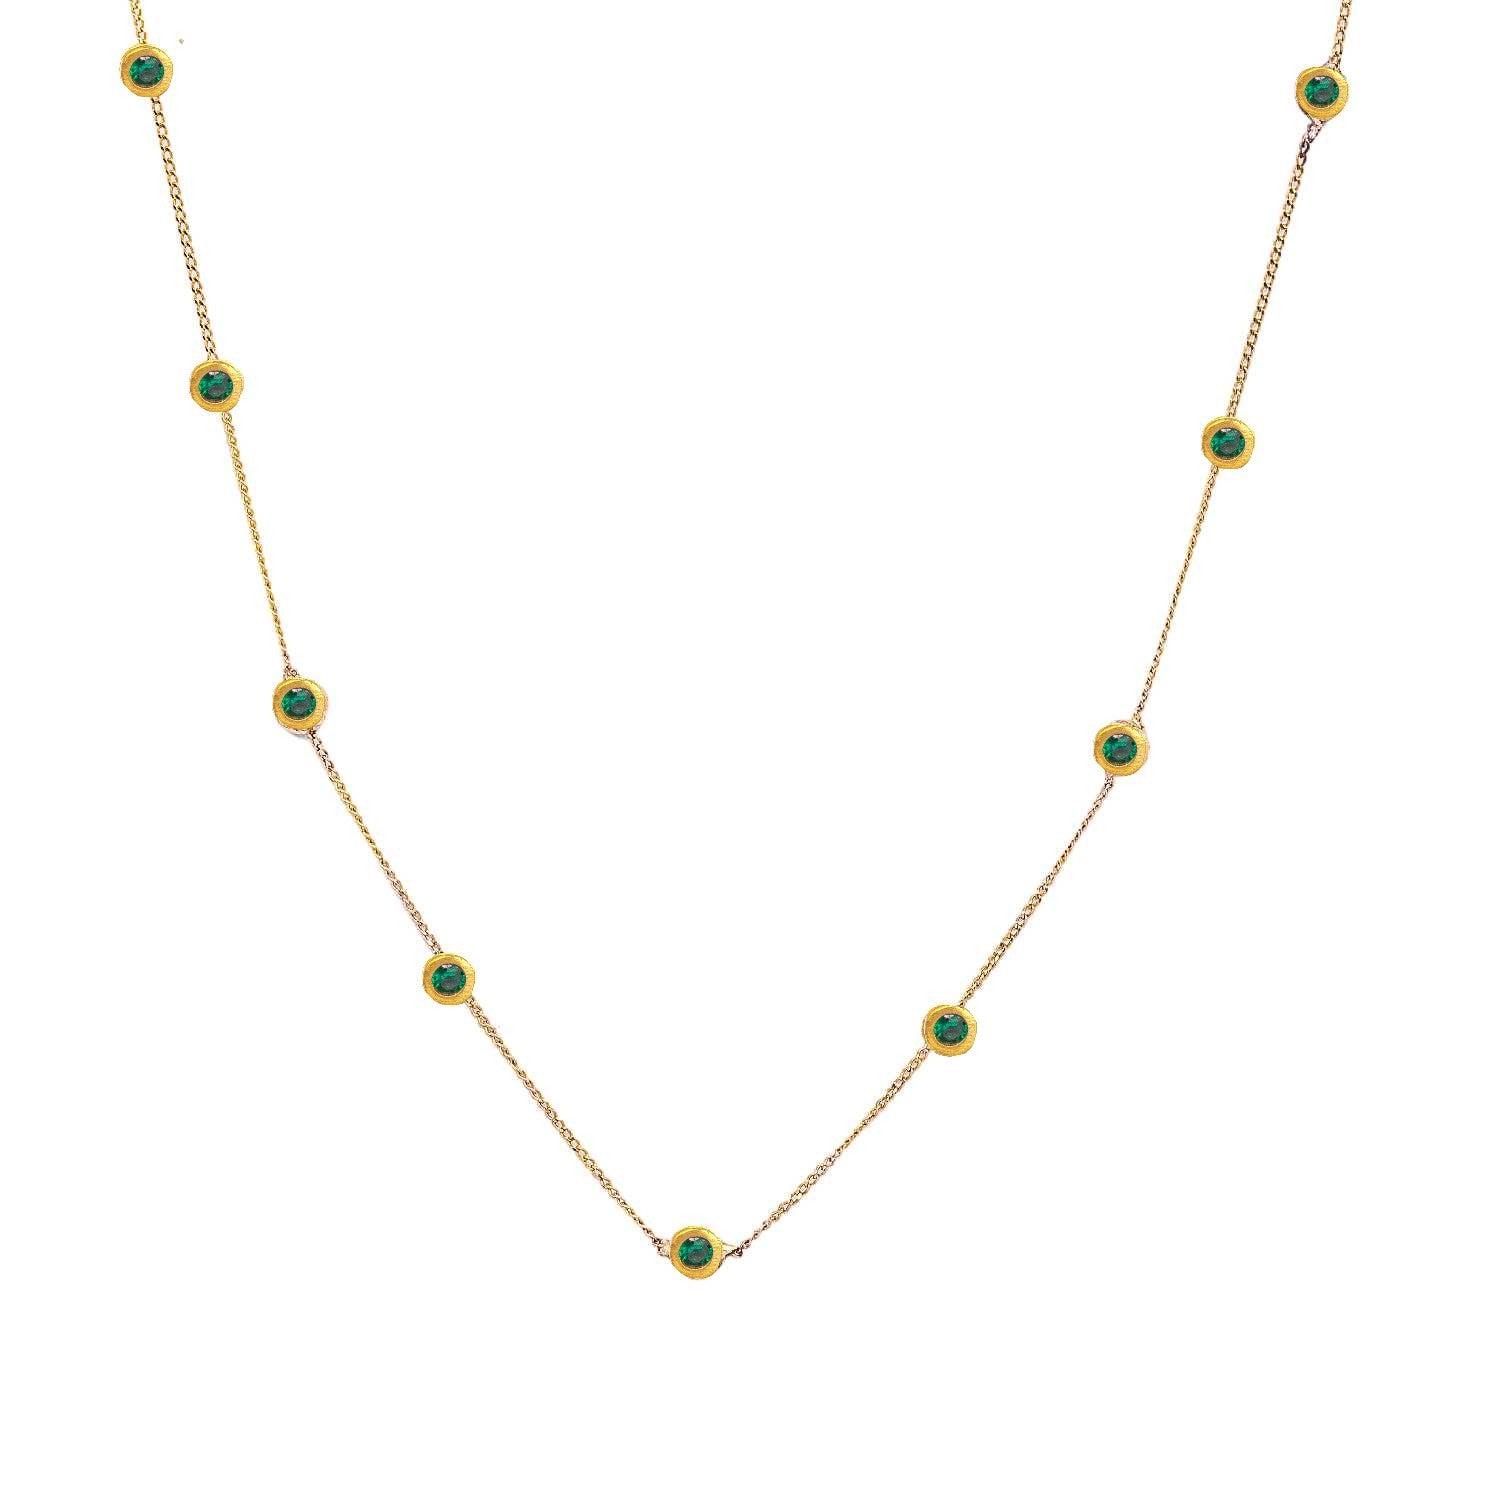 Lily Flo Jewellery Starlight Emerald Station Necklace in Metallic | Lyst